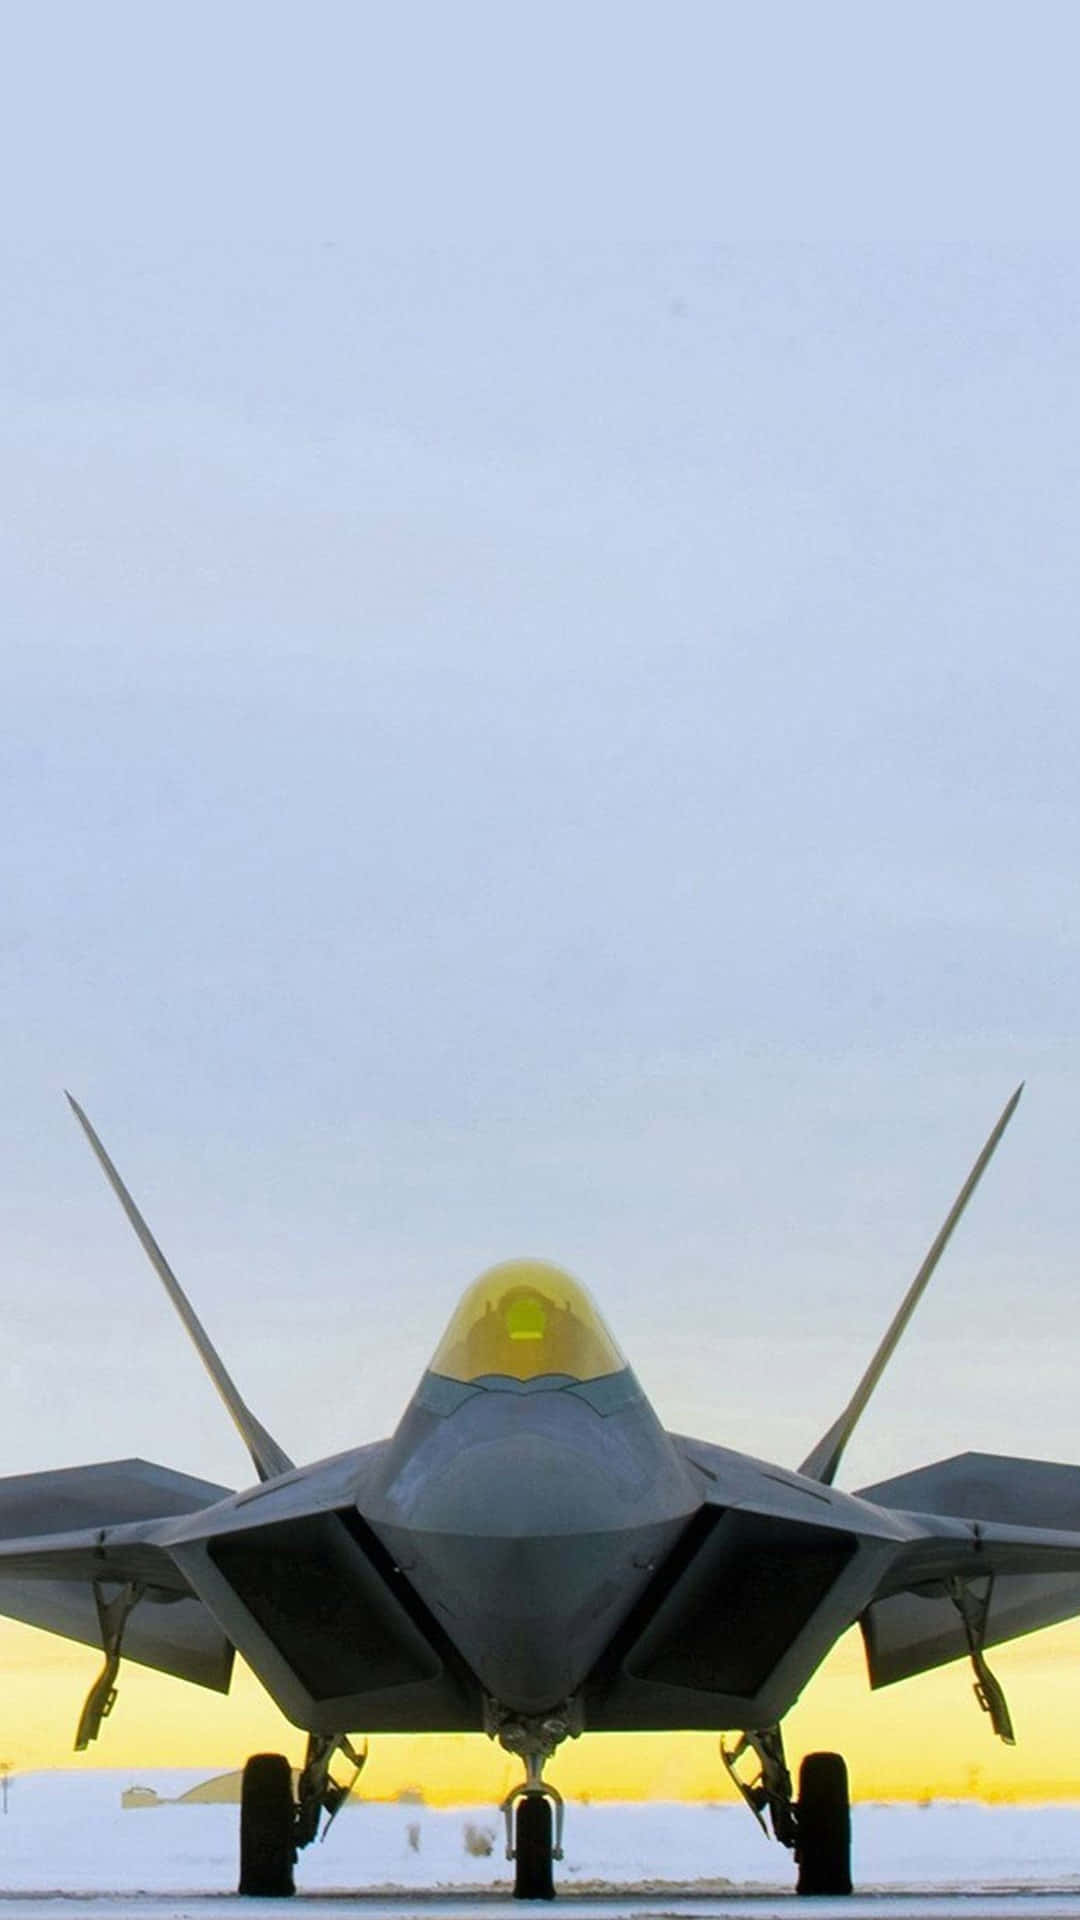 Wallpaper F-22, Raptor, Lockheed, Martin, stealth, air superiority fighter,  U.S. Air Force, Military #1823